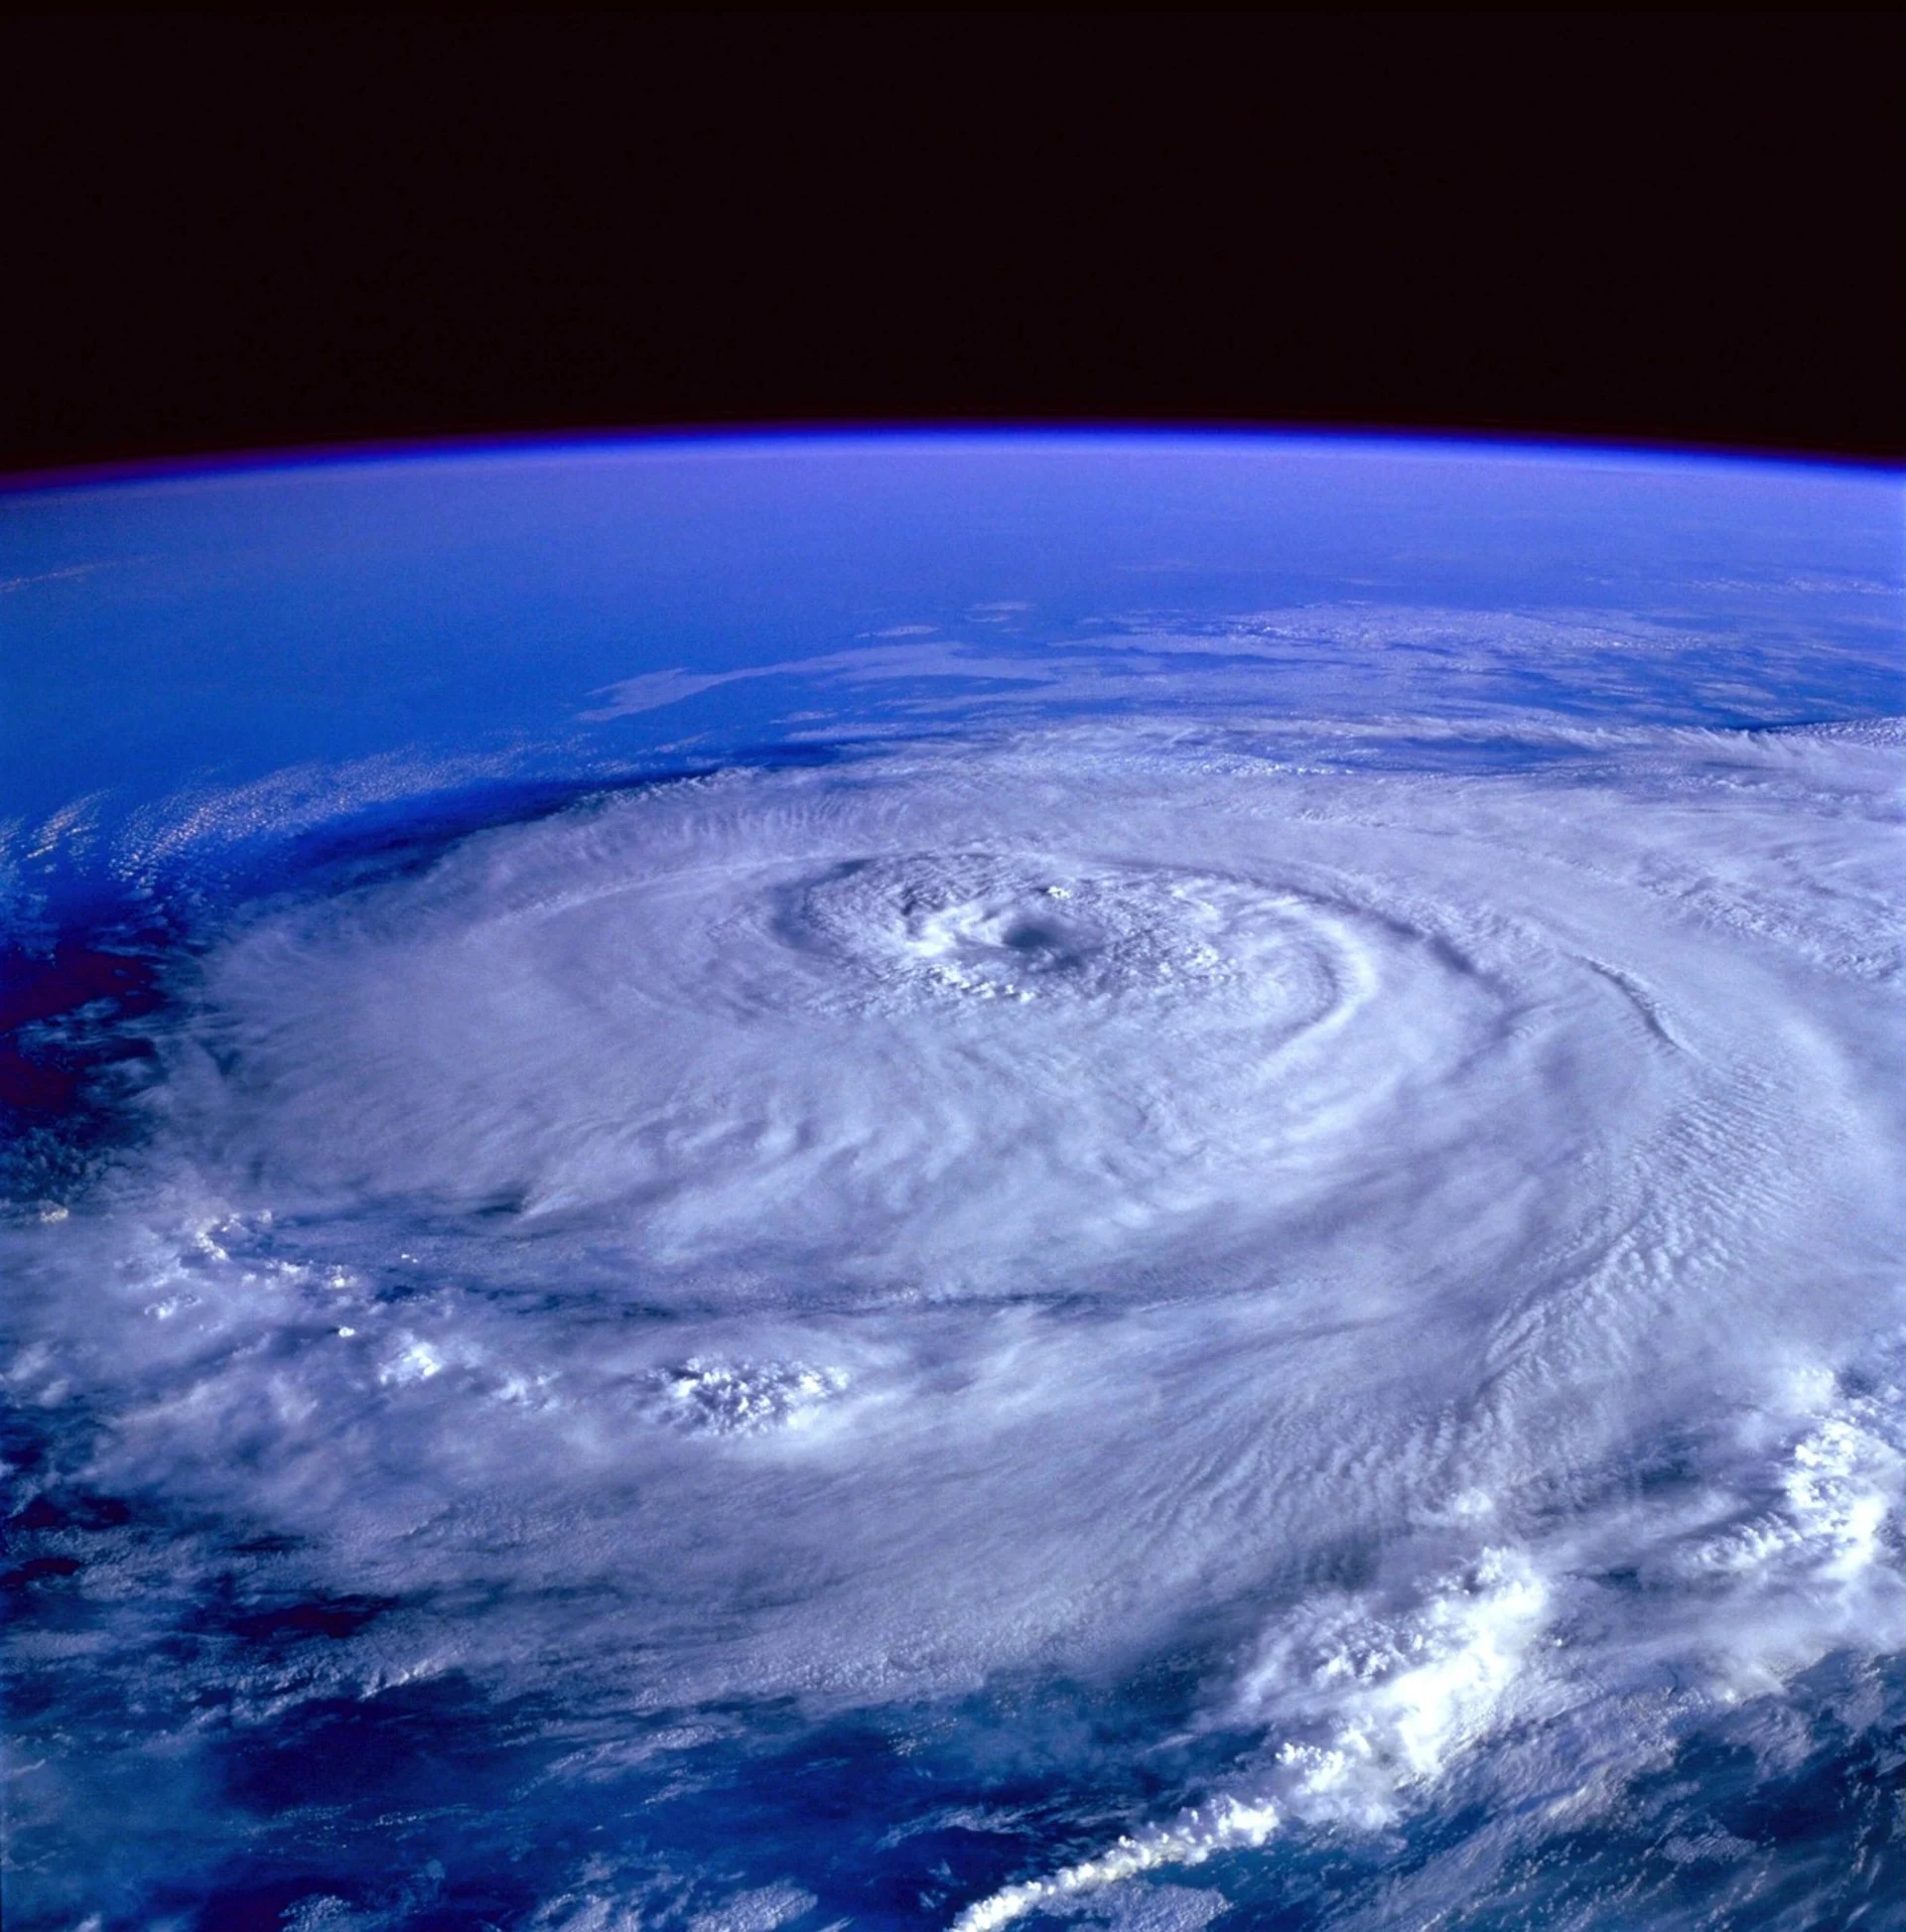 It's not just your imagination, Atlantic storms are getting stronger faster